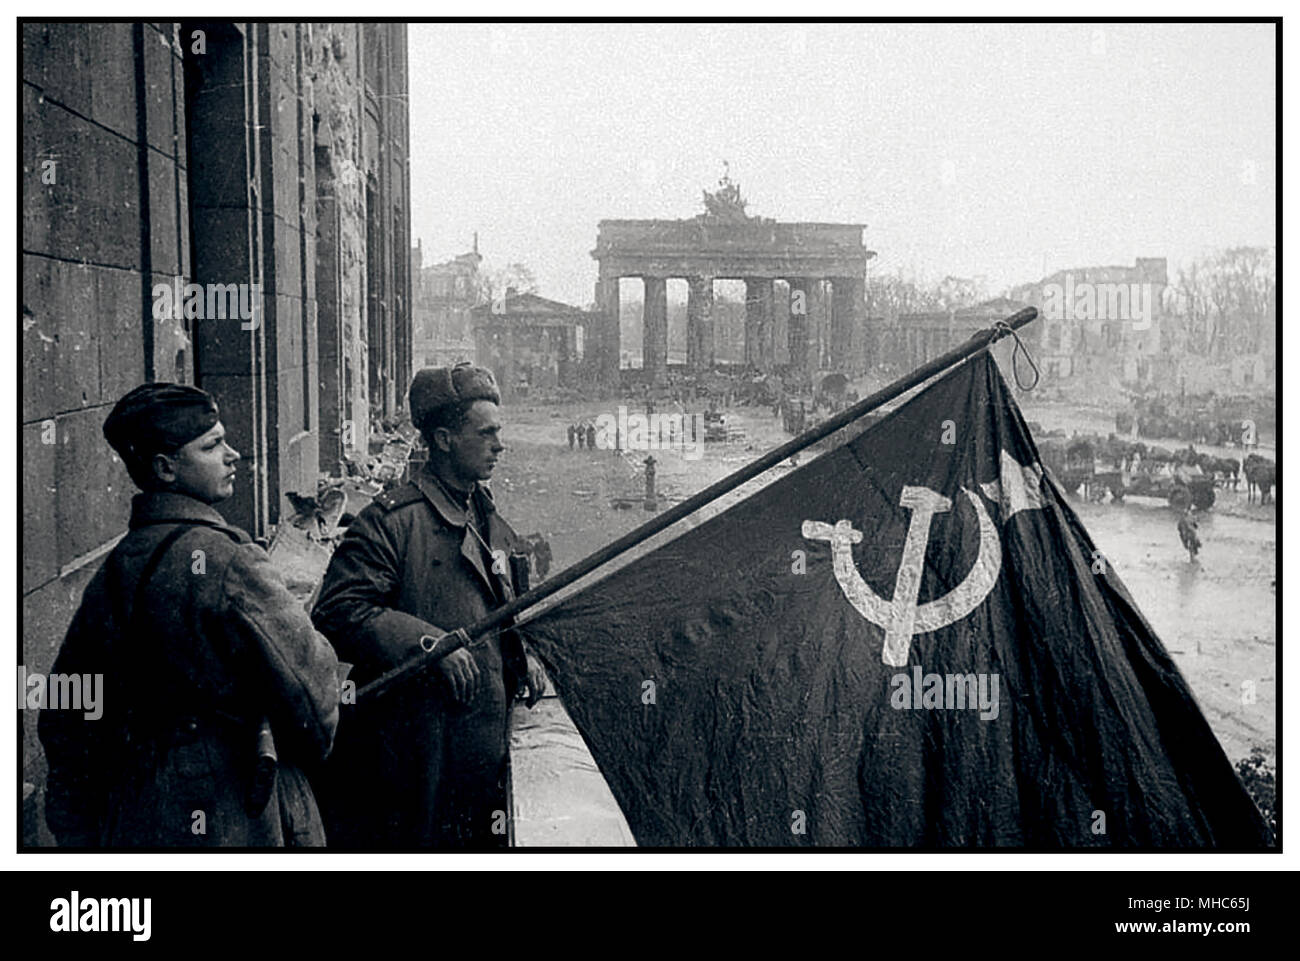 1945 WW2  Russian soldiers proudly hold their national symbol the Hammer and Sickle Flag in Victory Berlin Germany The Brandenburg Gate lies behind in a very pitted and battered state. Once a symbol of German pride, here in May 1945 it lies almost in ruins Stock Photo